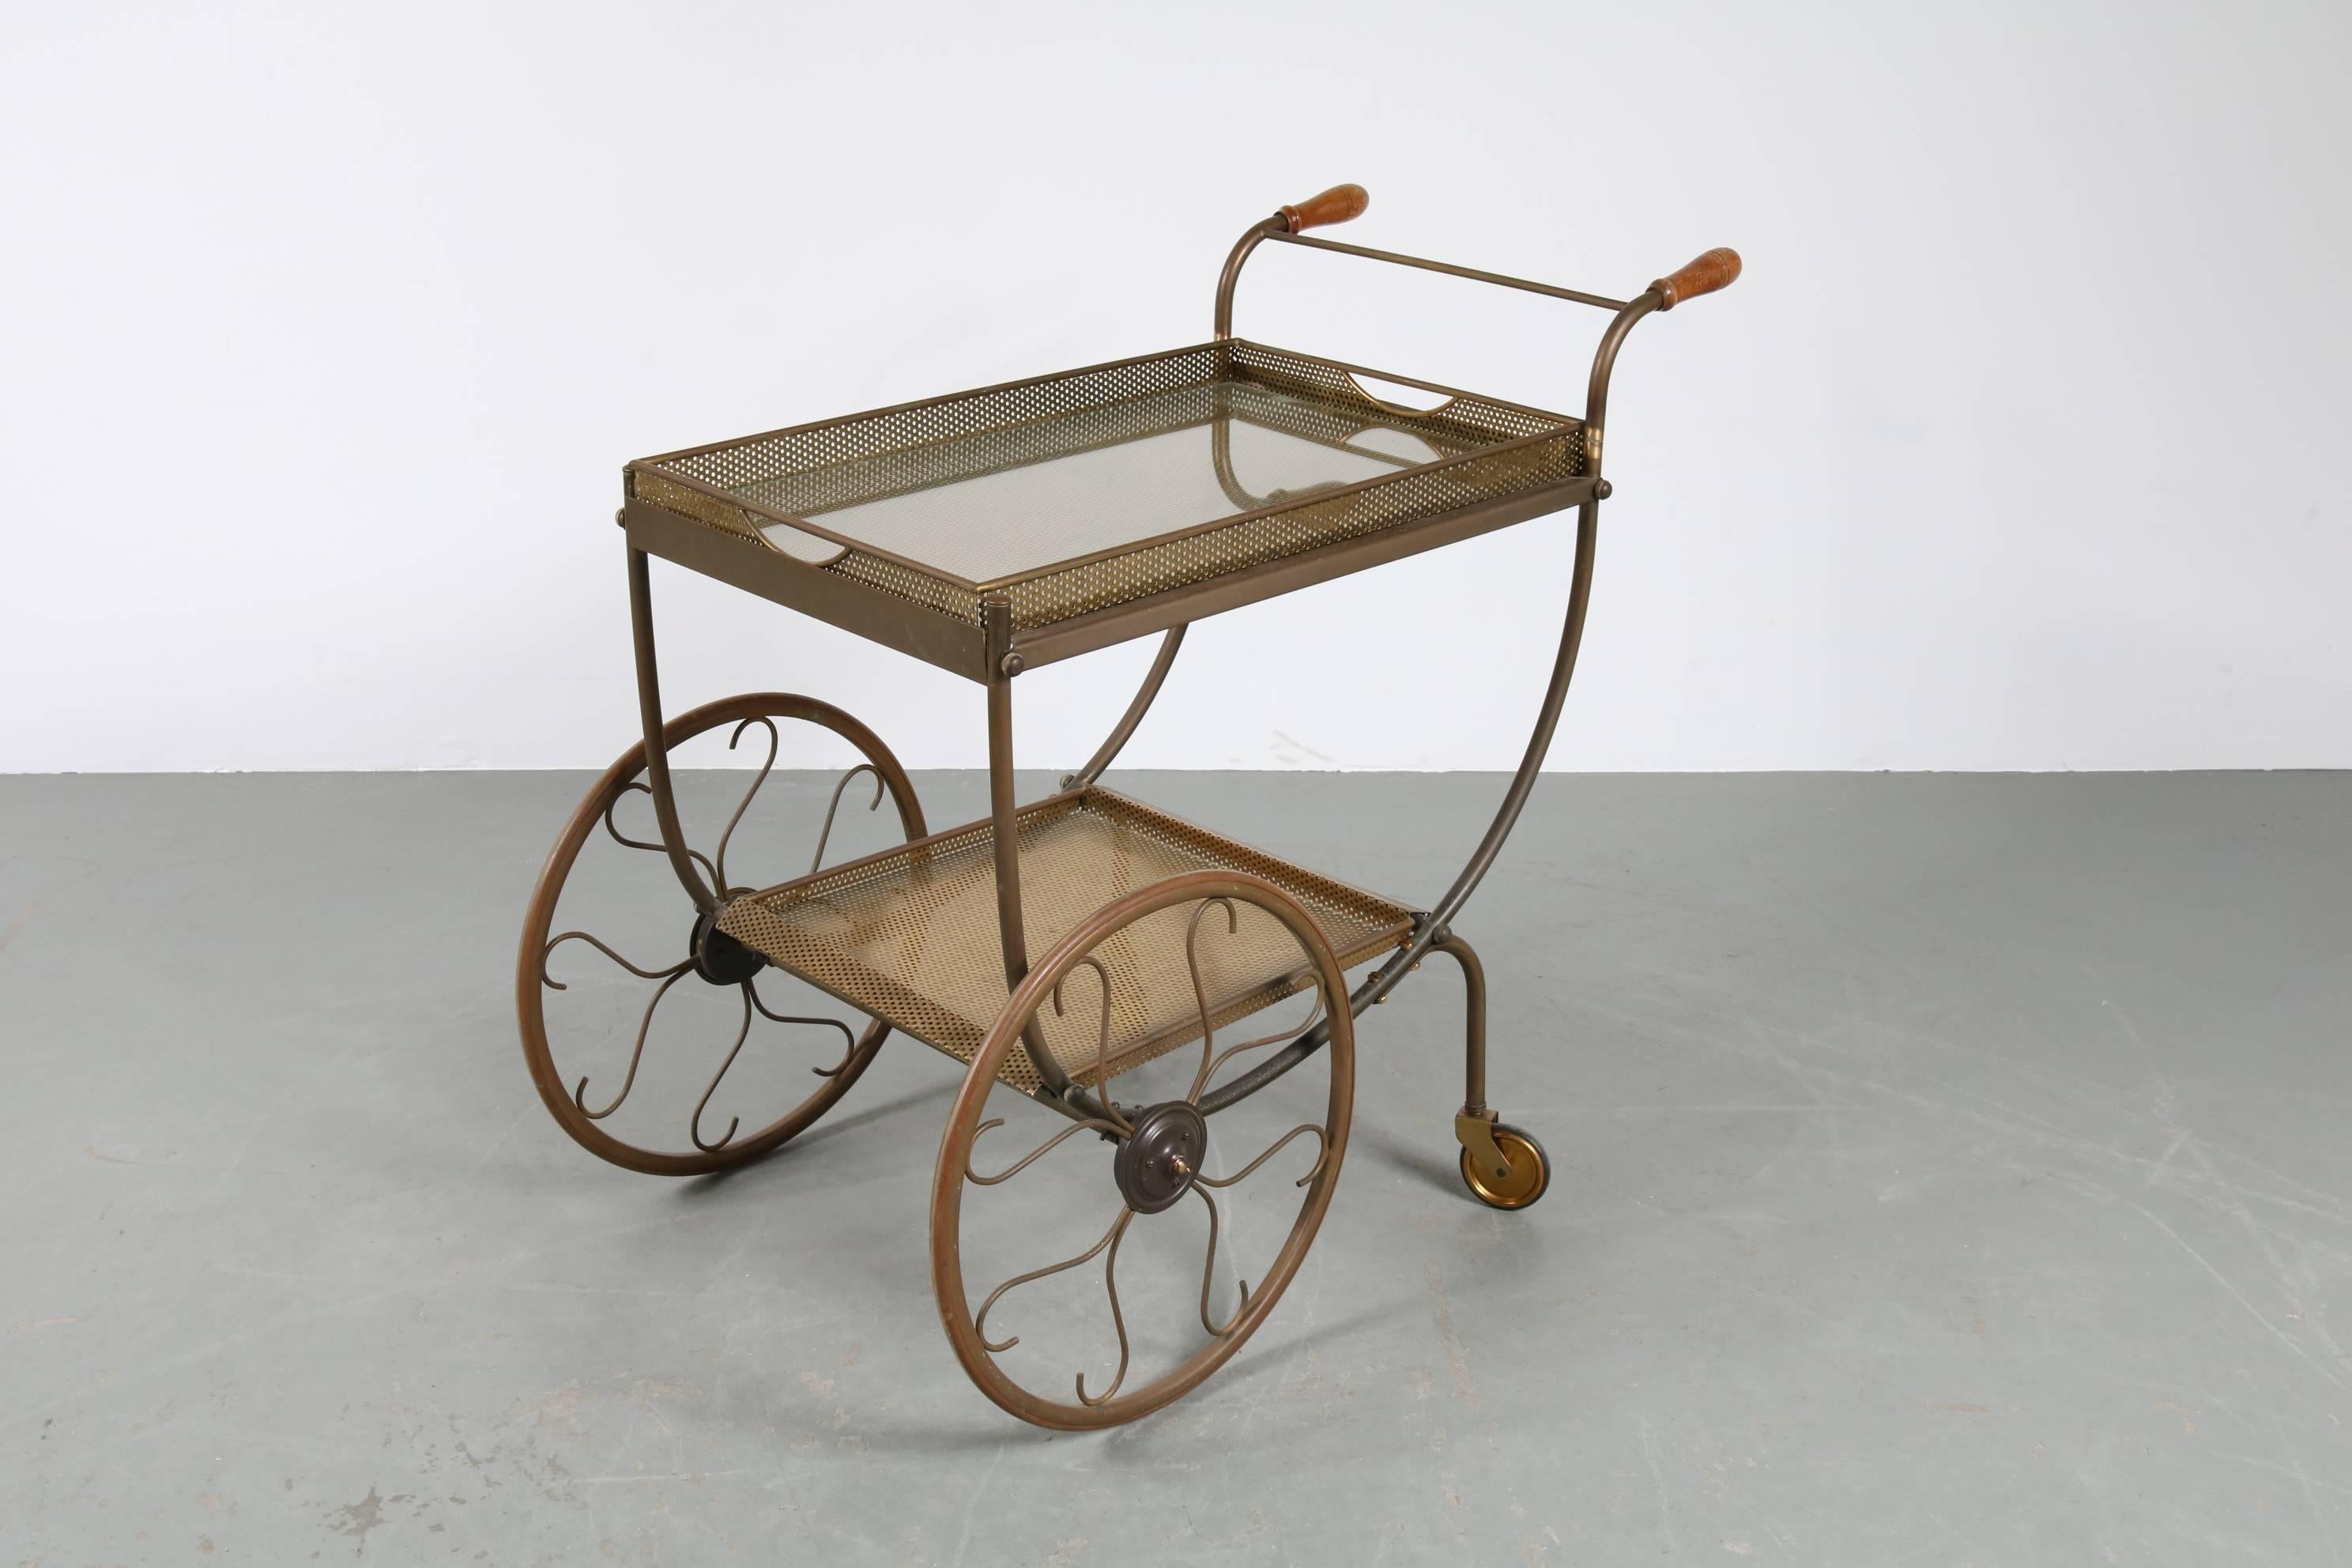 Luxurious tea trolley bar cart, manufactured in Sweden by Svenskt Tenn, circa 1950.

This elegant piece is made of beautiful quality brass, giving it beautiful classy appearance. It stands out with its amazing details in the design. It has two